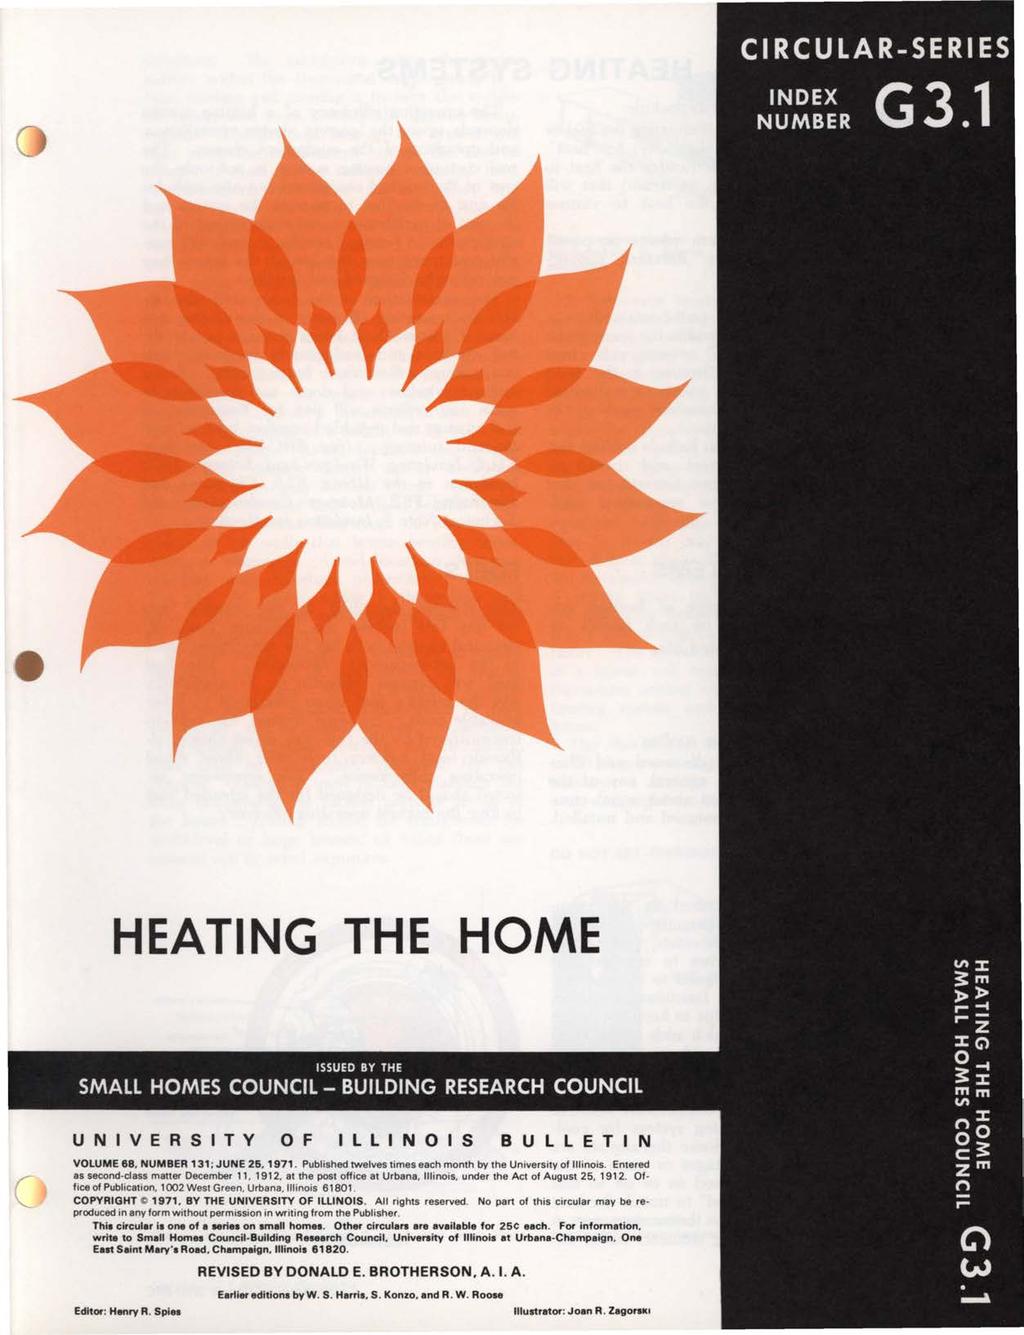 HEATING THE HOME UNIVERSITY 0 F ILLINOIS BULLETIN VOLUME 68, NUMBER 131; JUNE 26, 1971. Published twelves times each month by the University of Illinois.